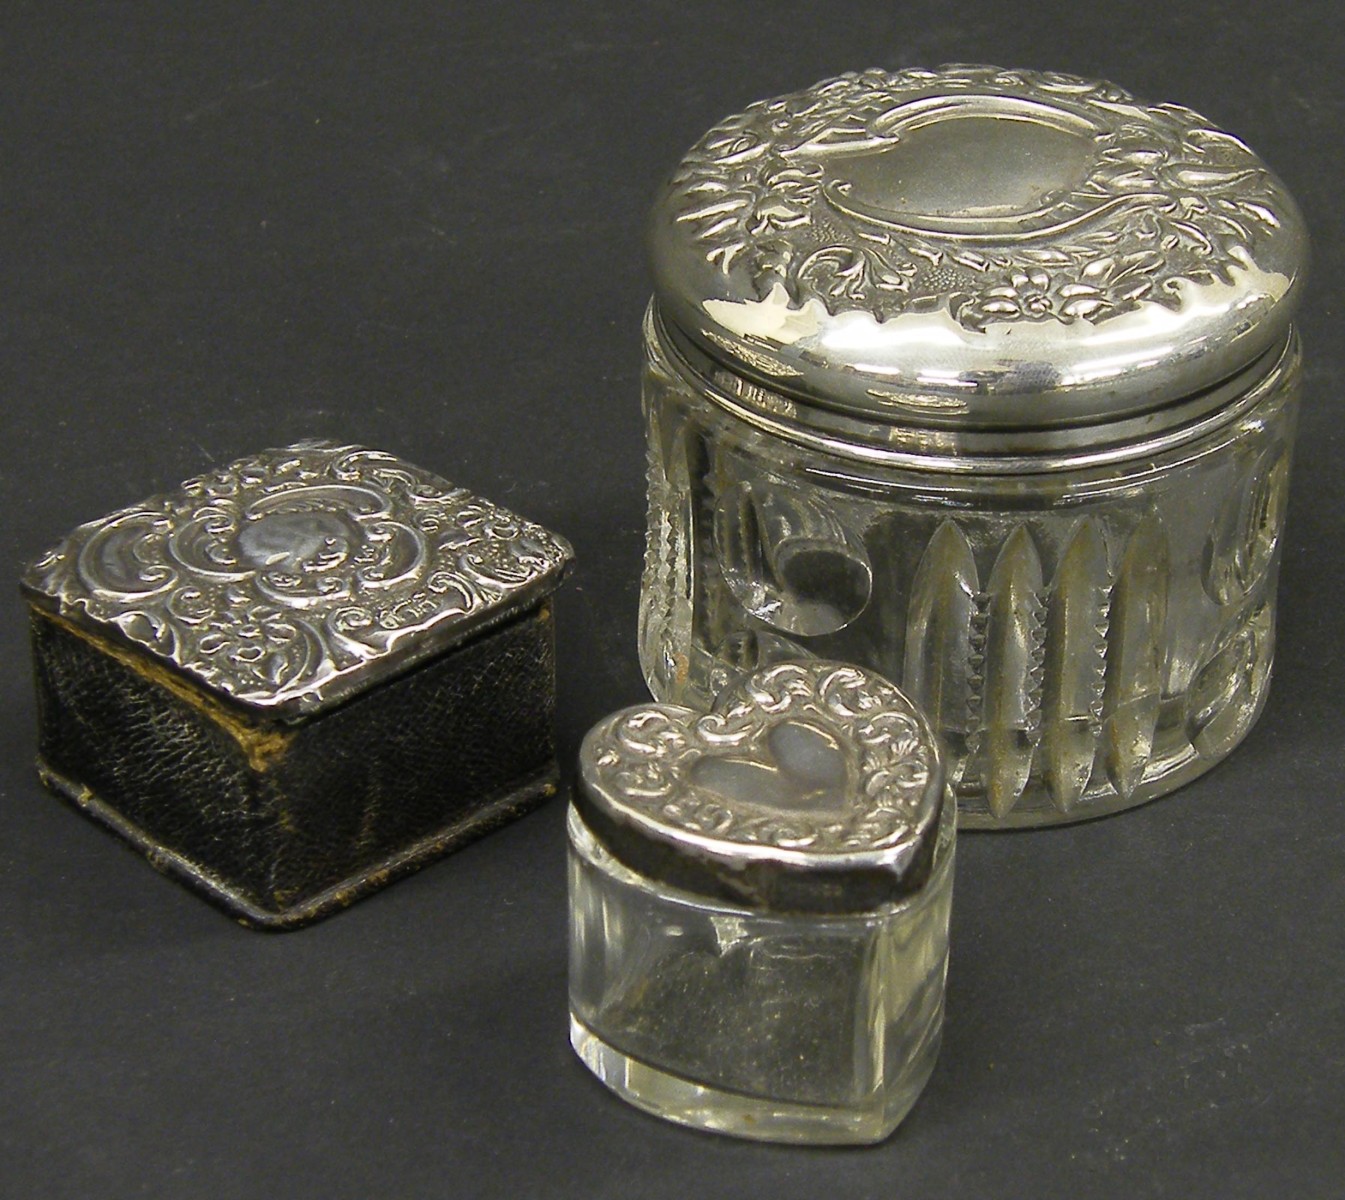 Edwardian silver lidded scent jar embossed with flowers and cartouches, maker`s marks indistinct,